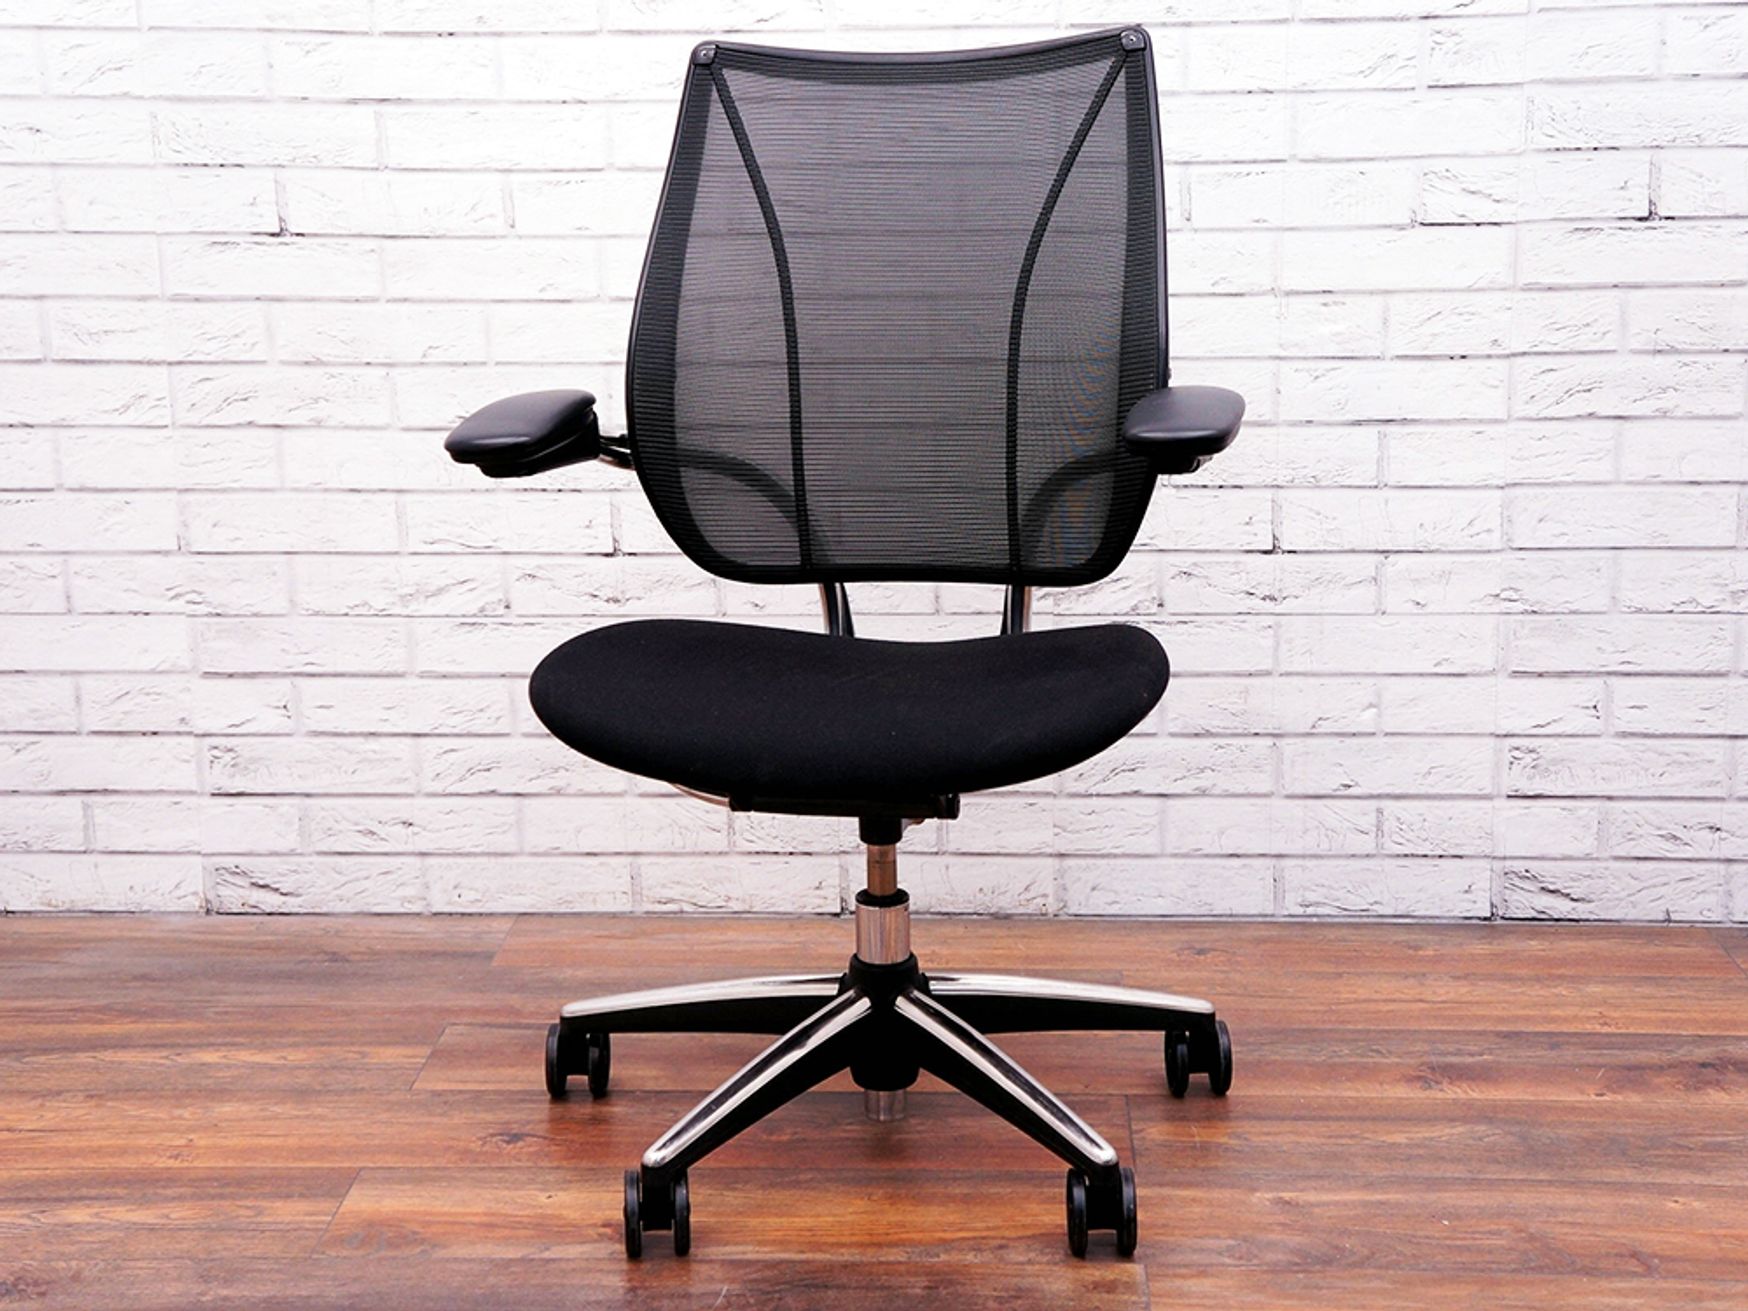 Used Humanscale Executive Liberty Chairs with Black Fabric Seat